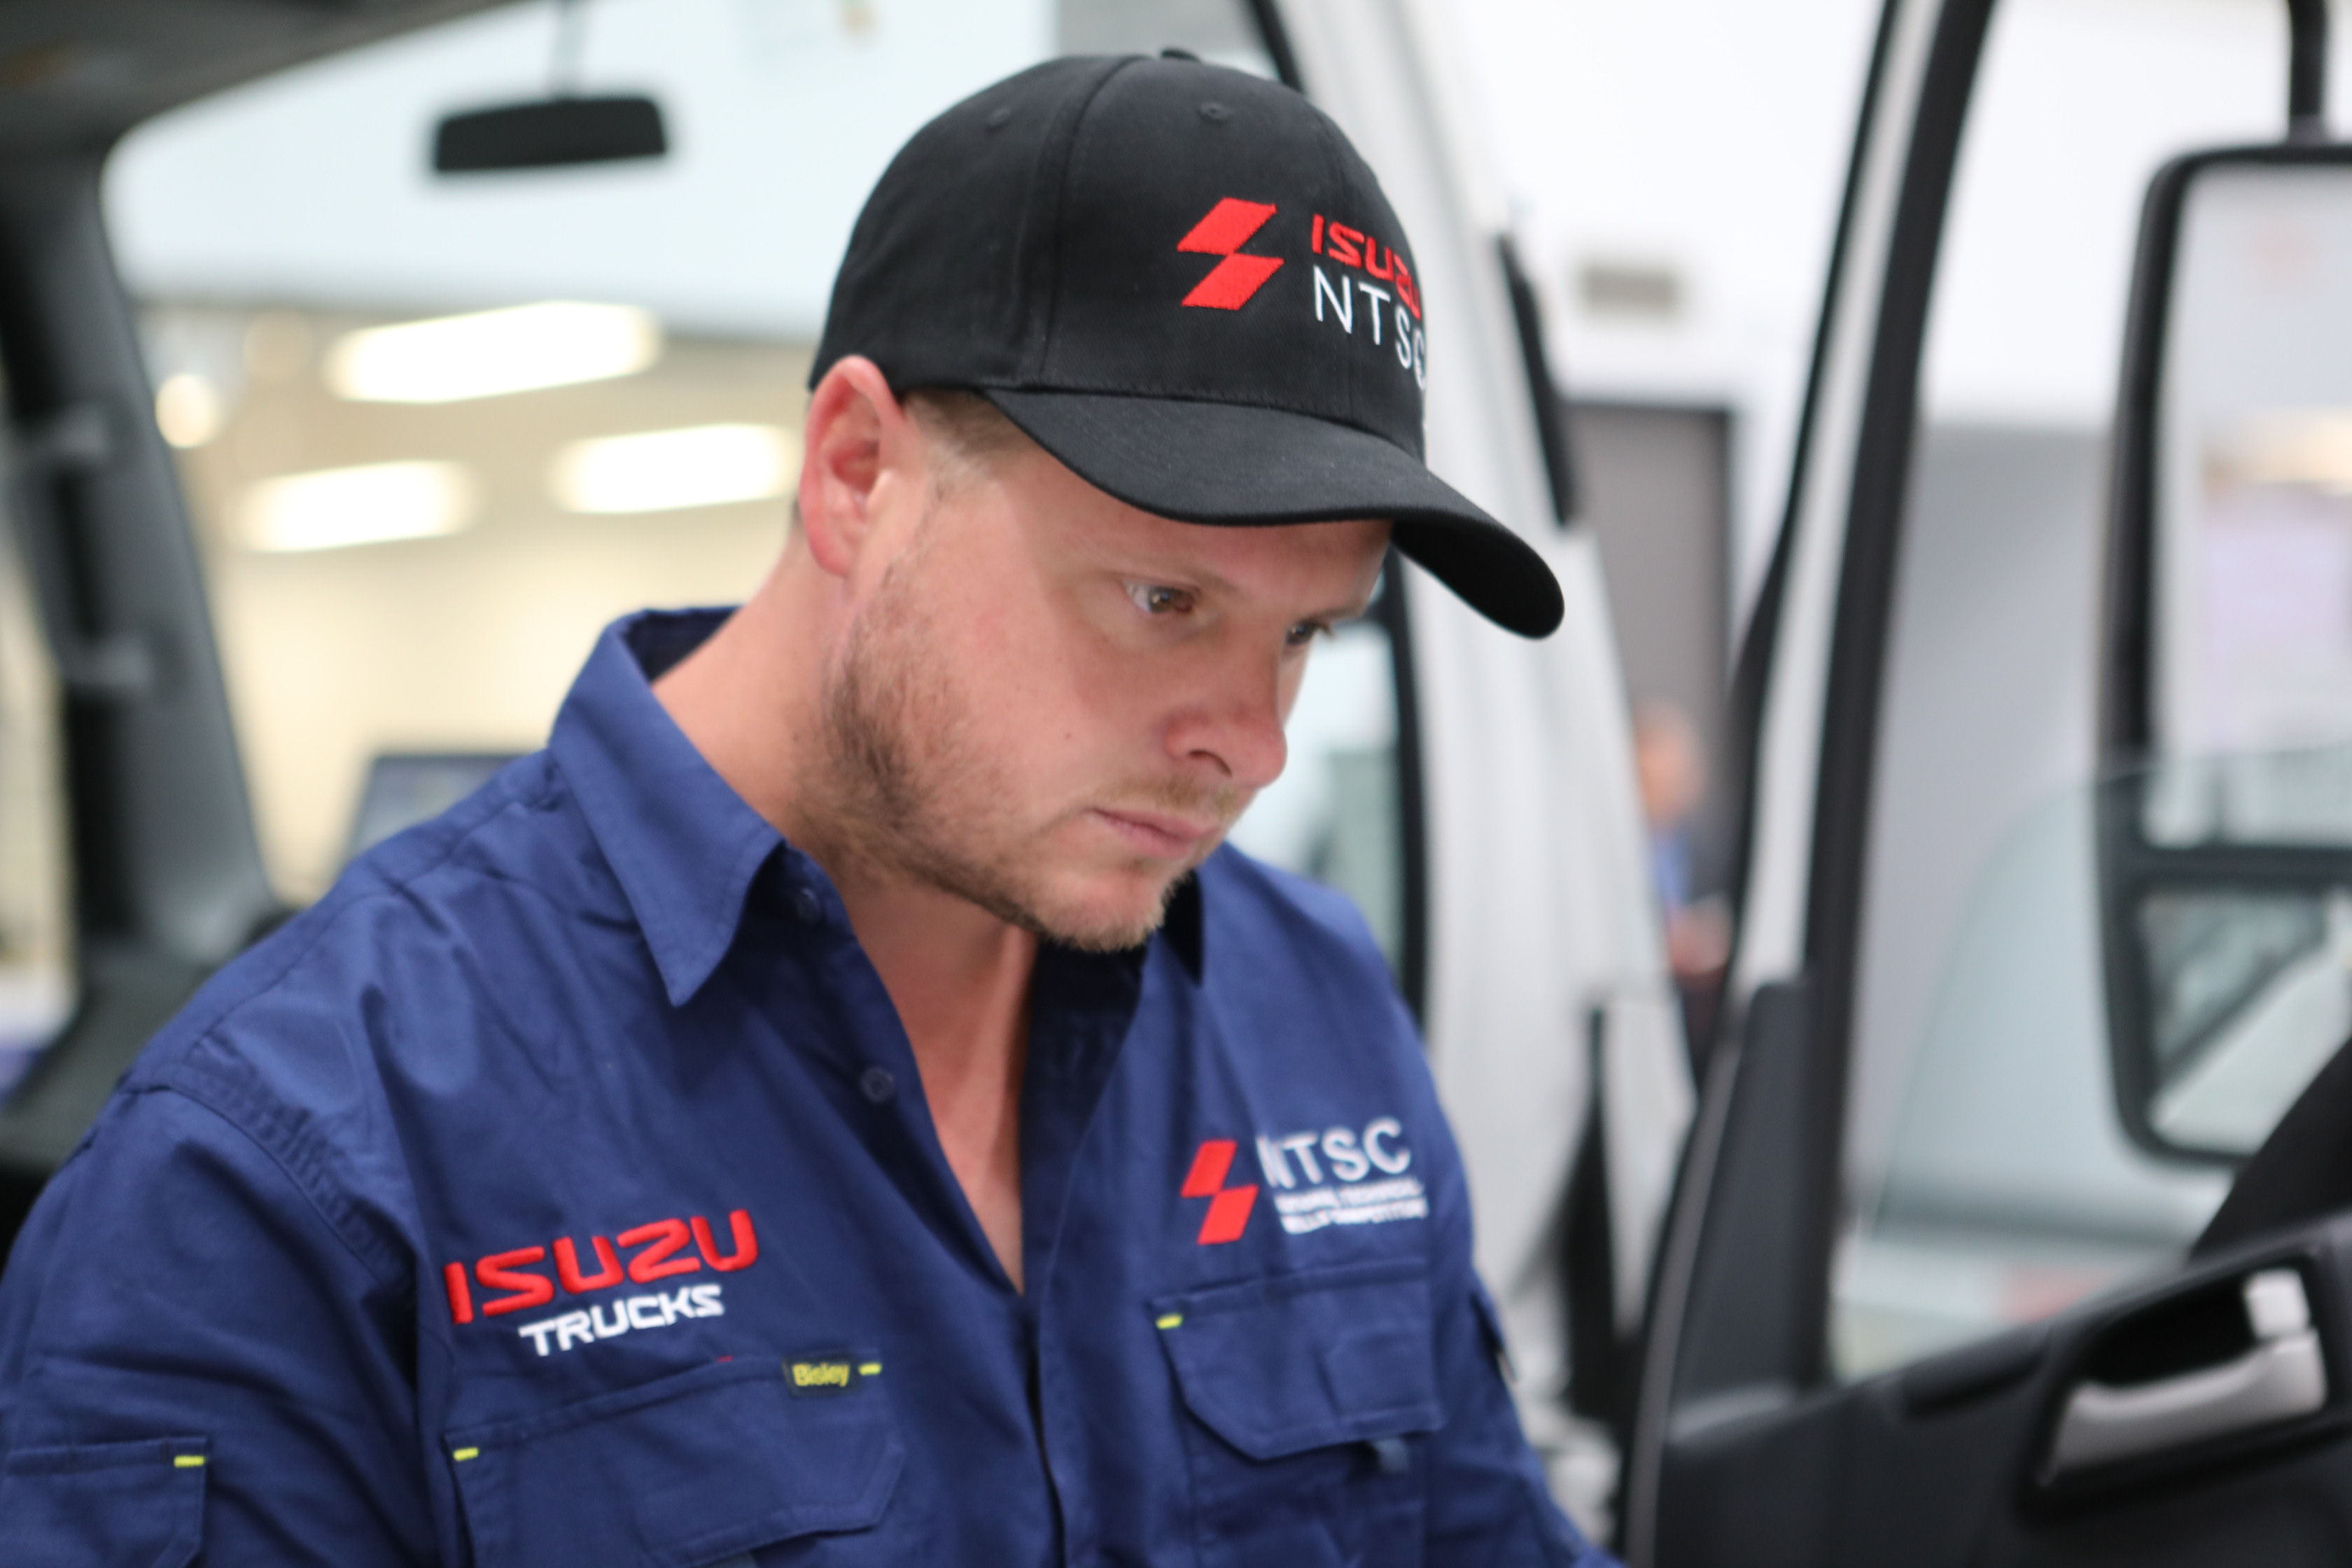 Jason Lee of Road Runner Mechanical Services, concentrating on vehicle diagnostics